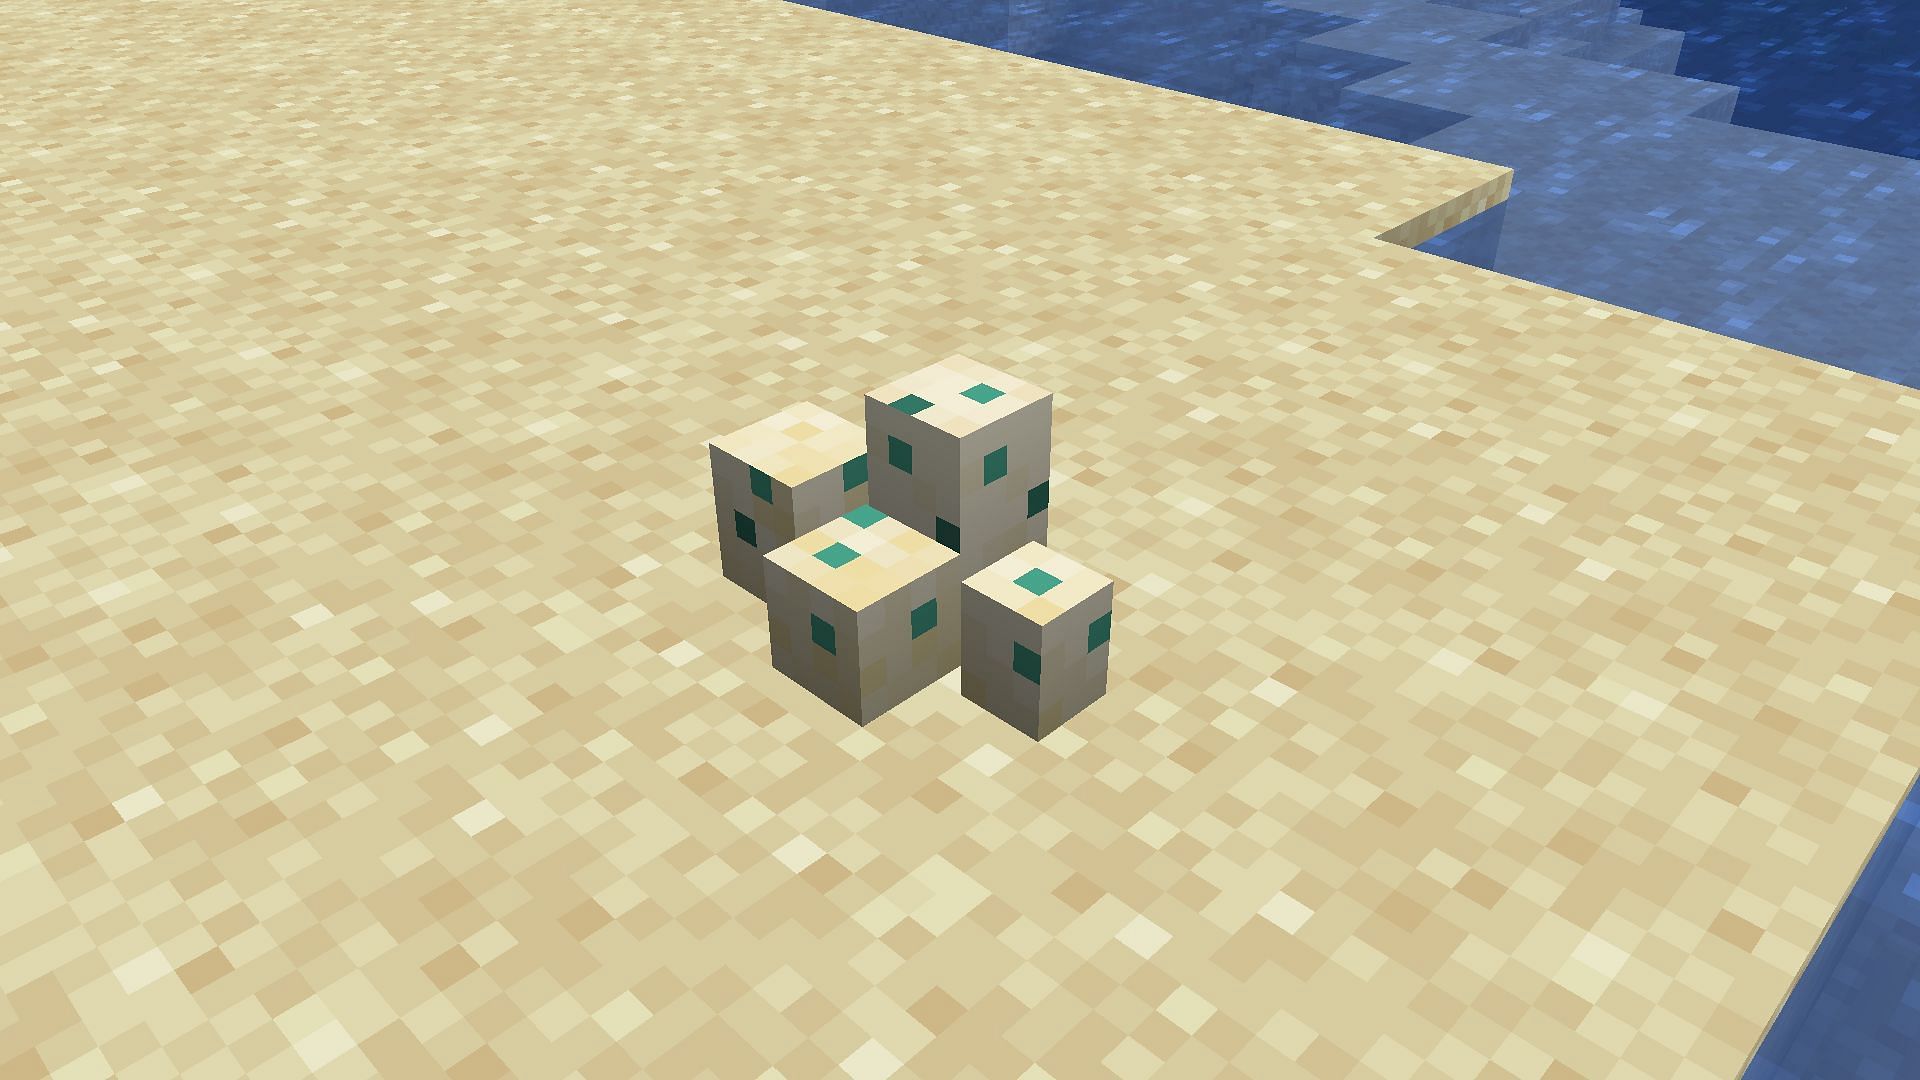 Turtle eggs in Minecraft: All you need know